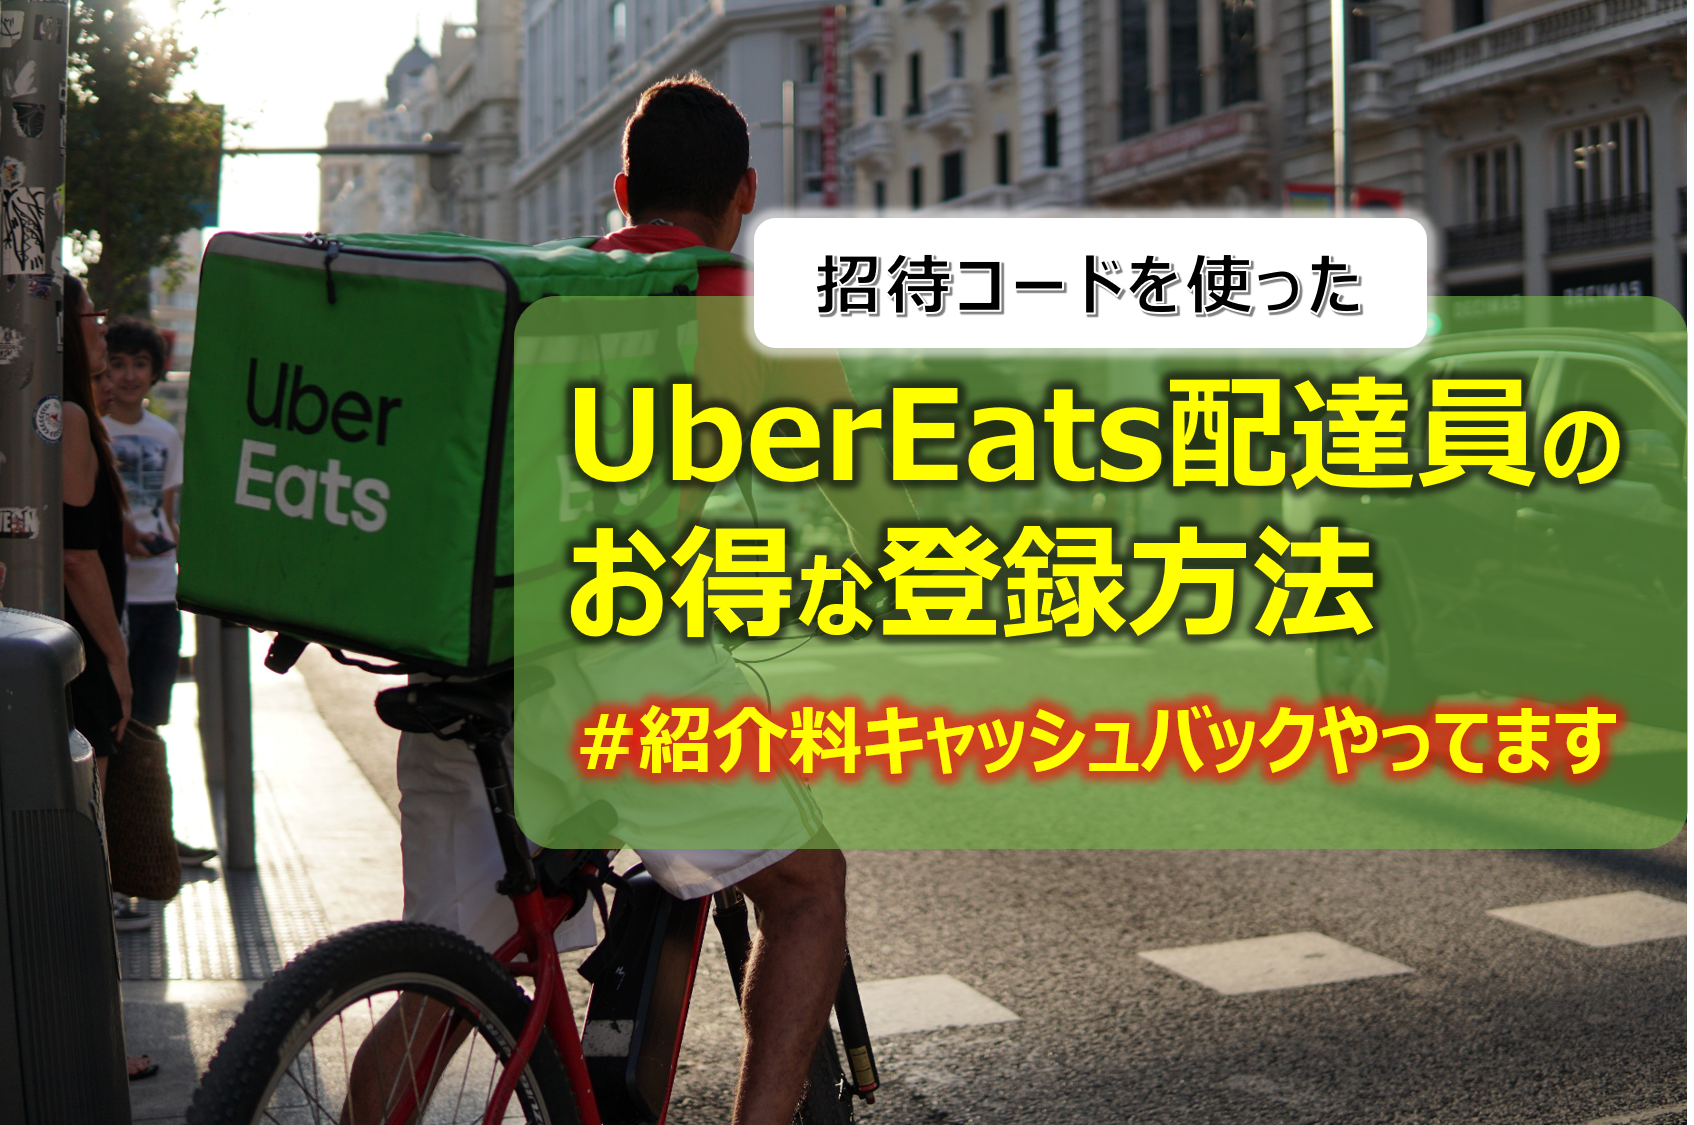 Uber Eats partner referral code and how to register